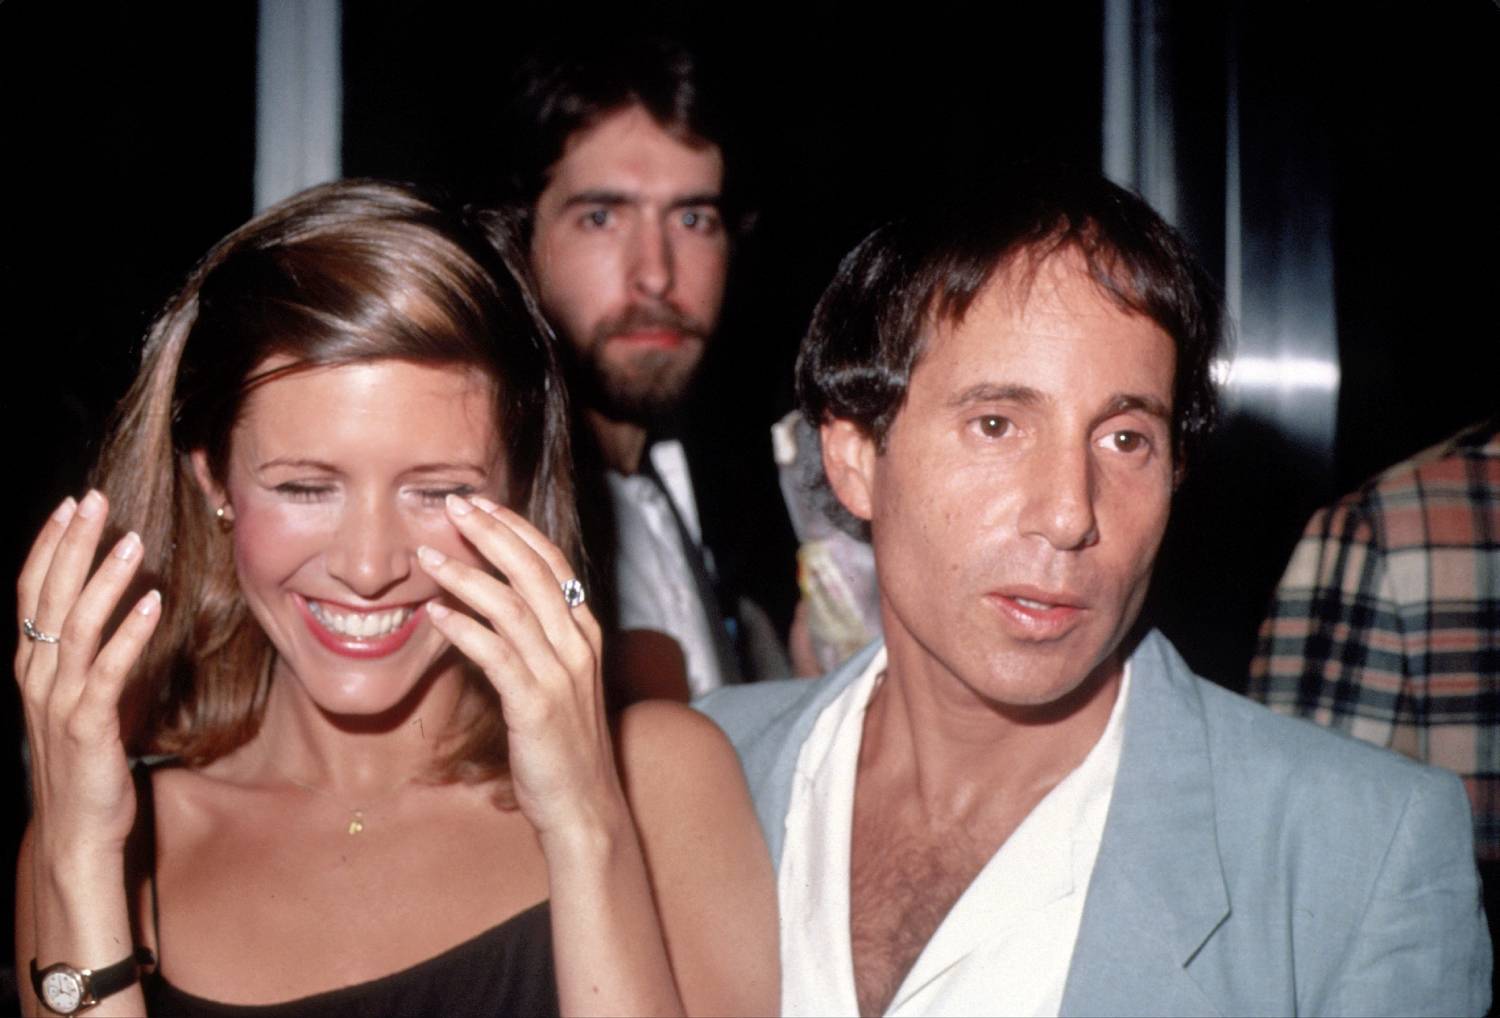 Carrie Fisher and Paul Simon circa 1983 in New York City